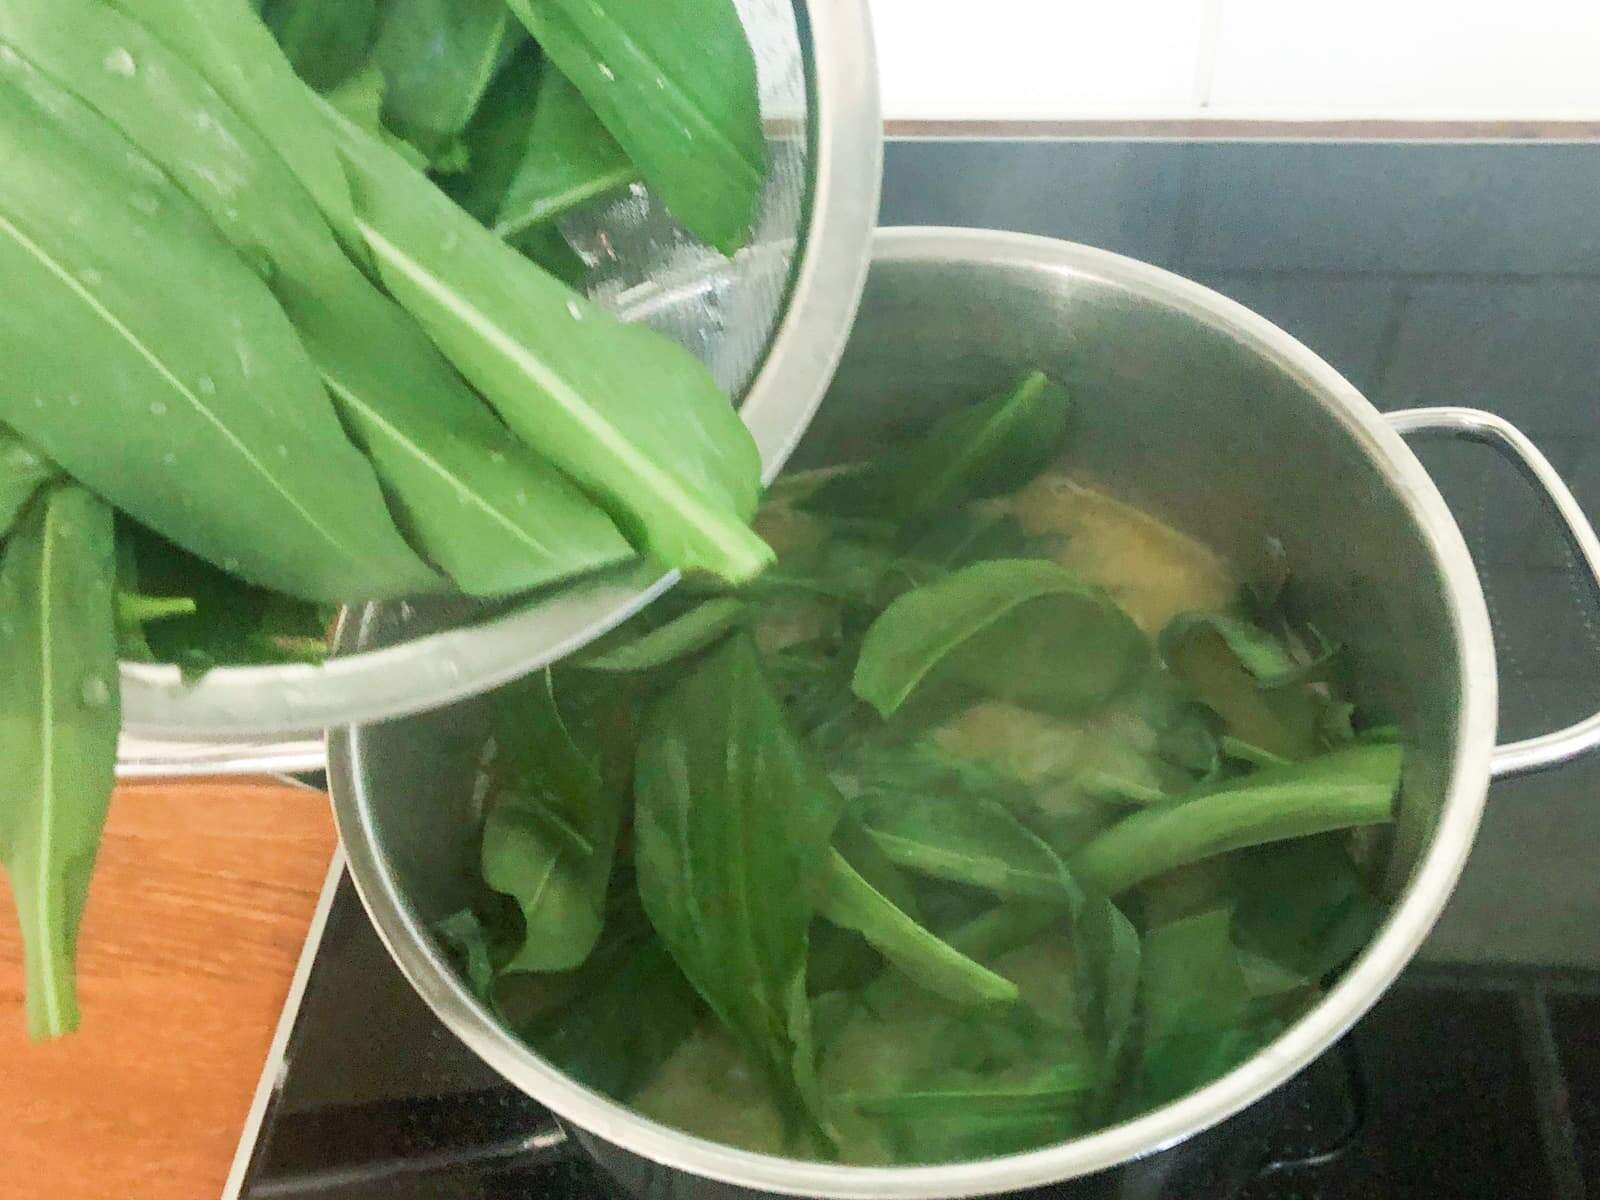 Wild garlic being added to a pot to make soup